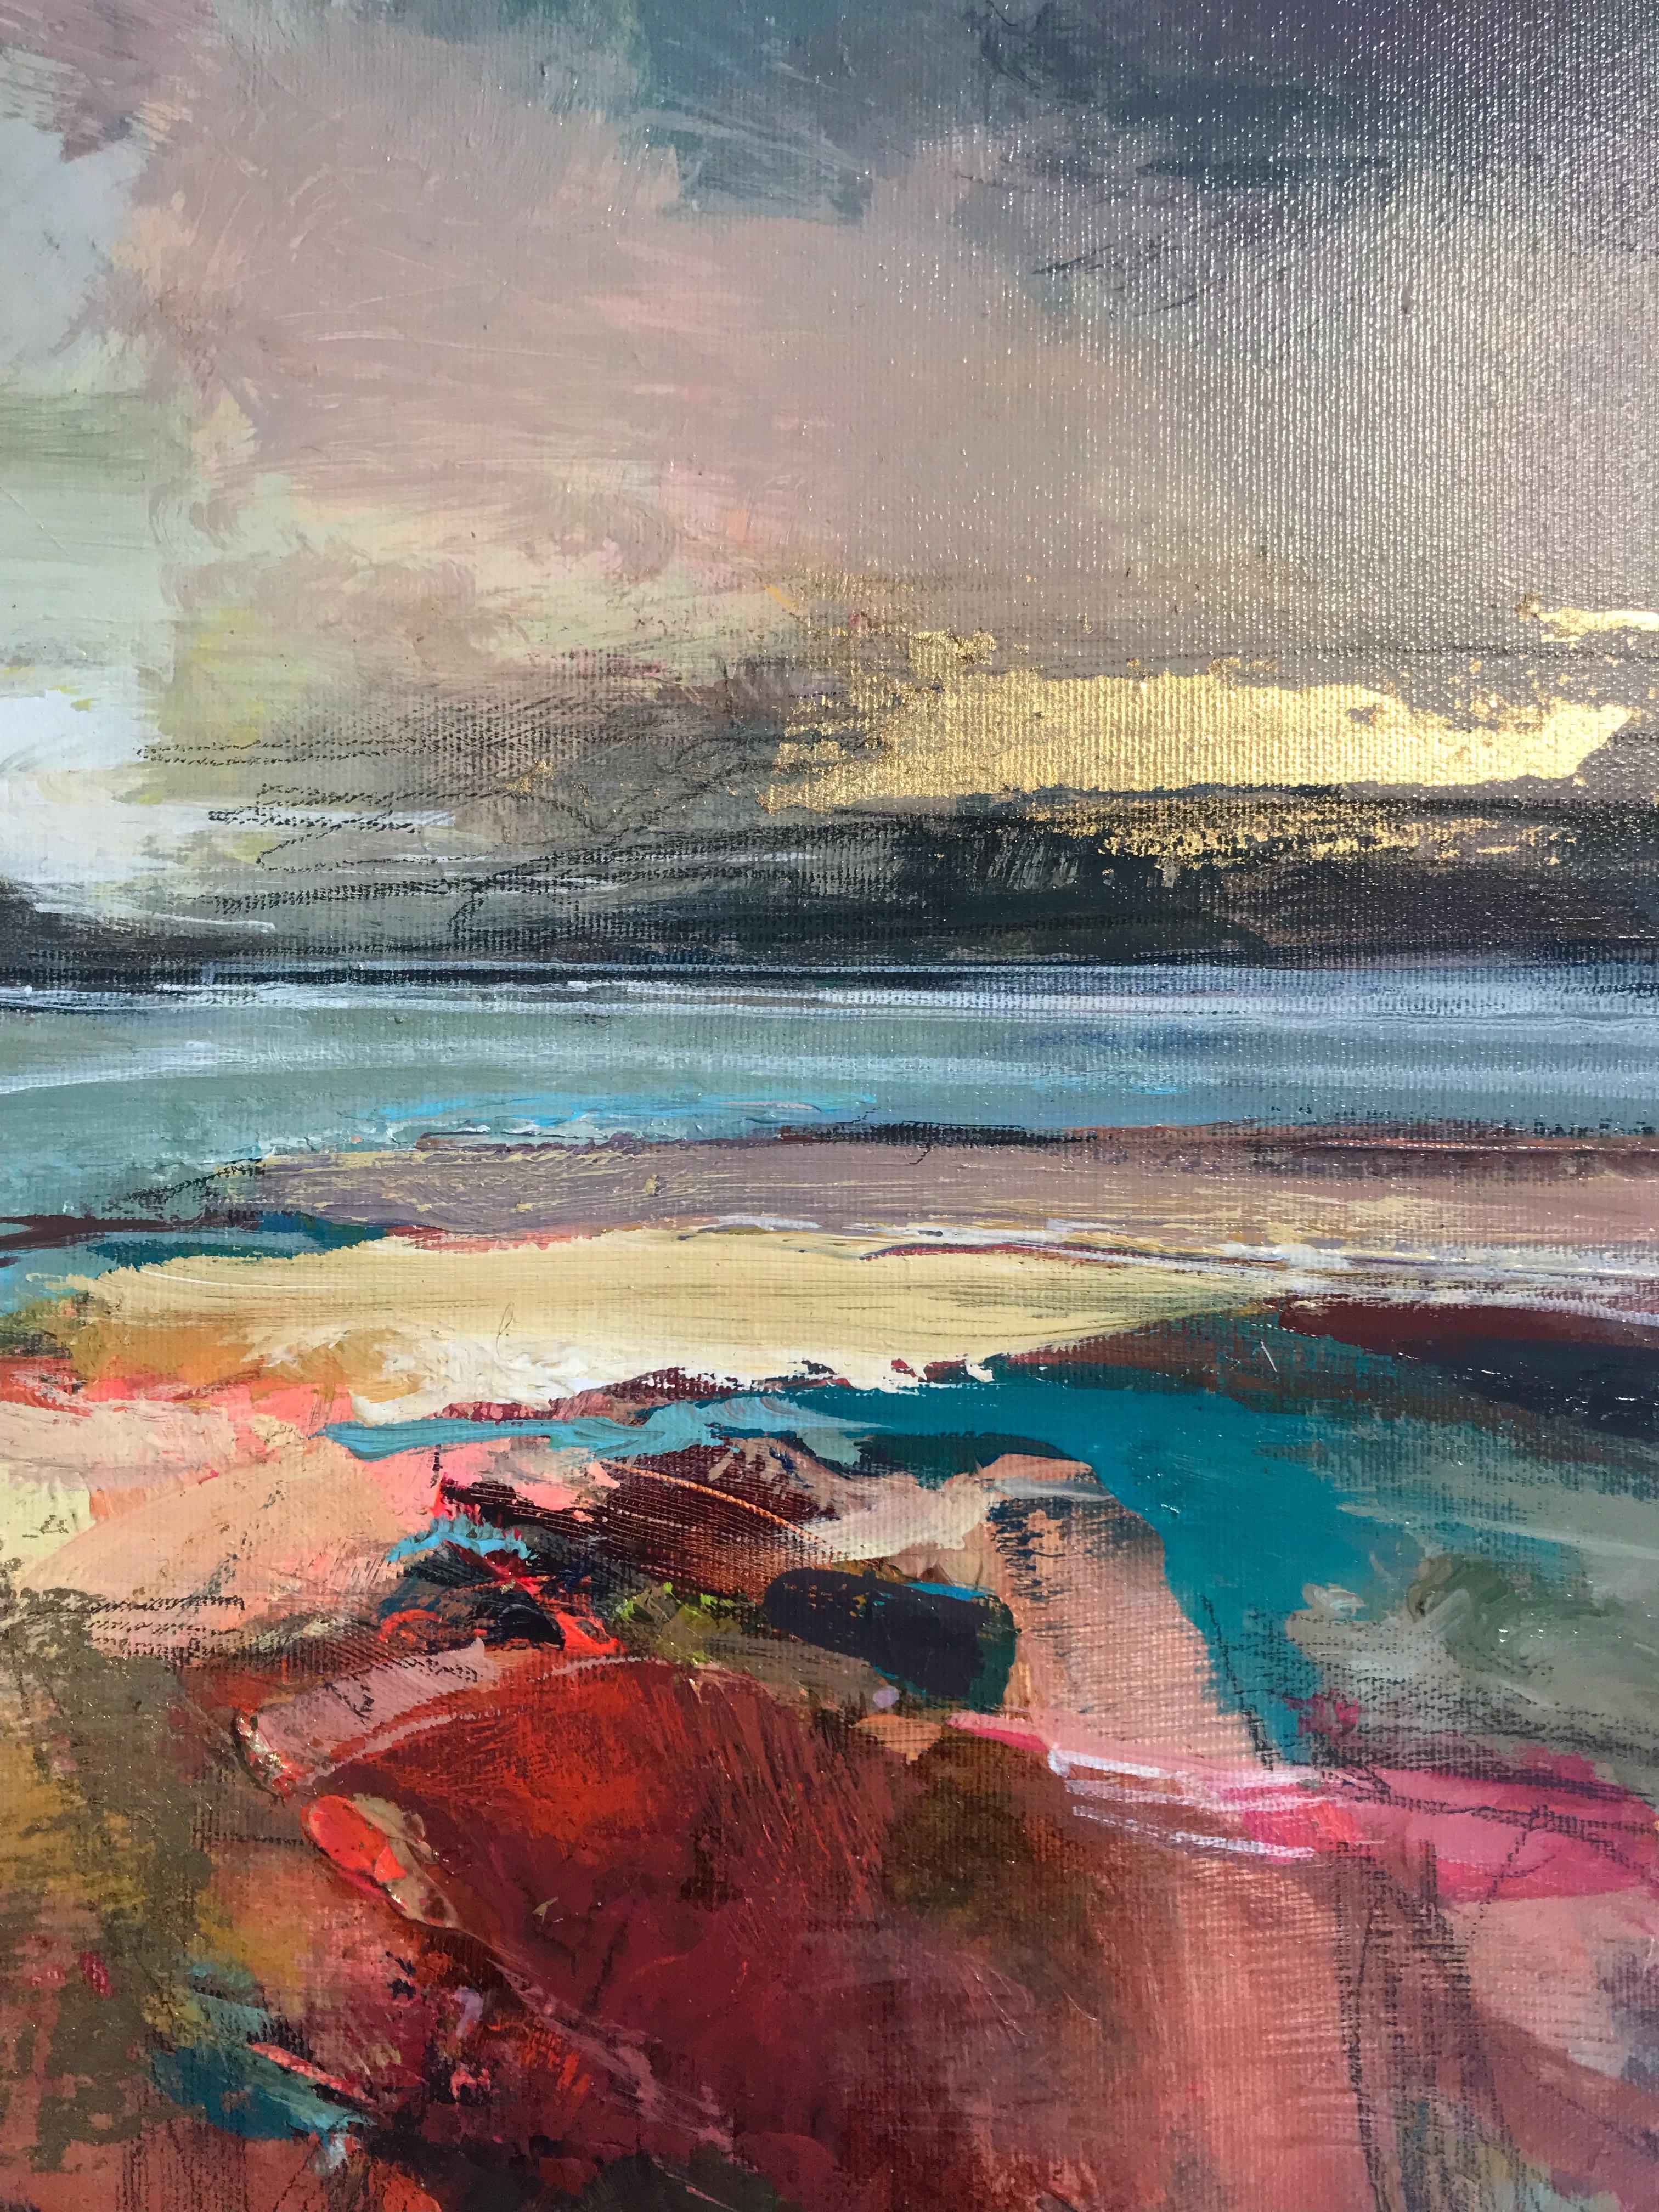 This original landscape painting by Magdalena Morey creates an impression of a natural vista using abstract forms and employing various media, including beguiling gold leaf. Offering a milieu of style and character, the artist applies a palette of